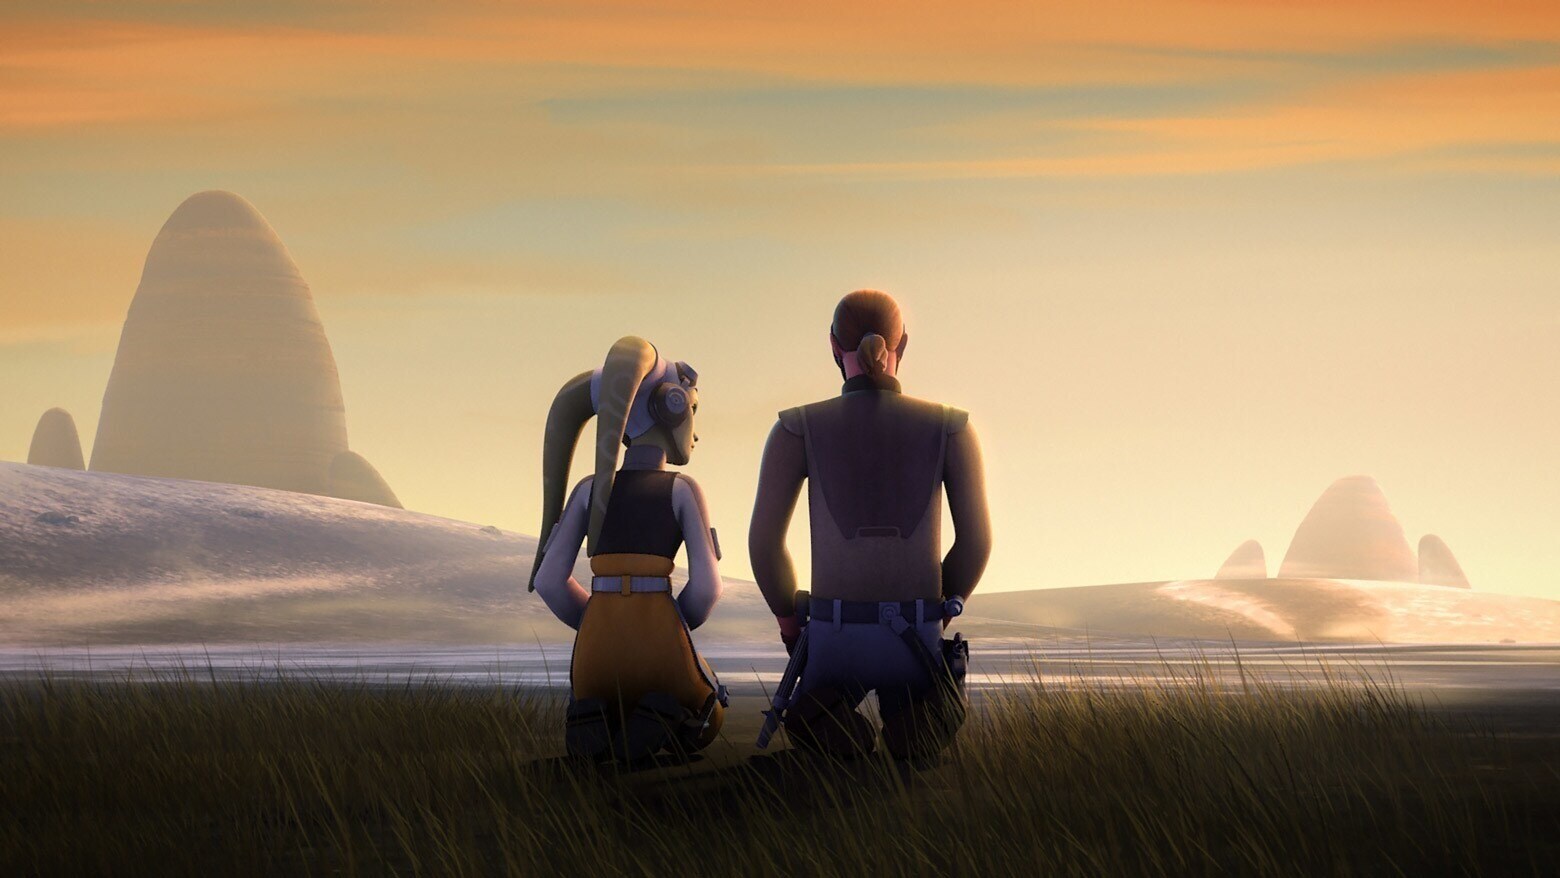 A rear view of Hera and Kanan sitting together on Lothal